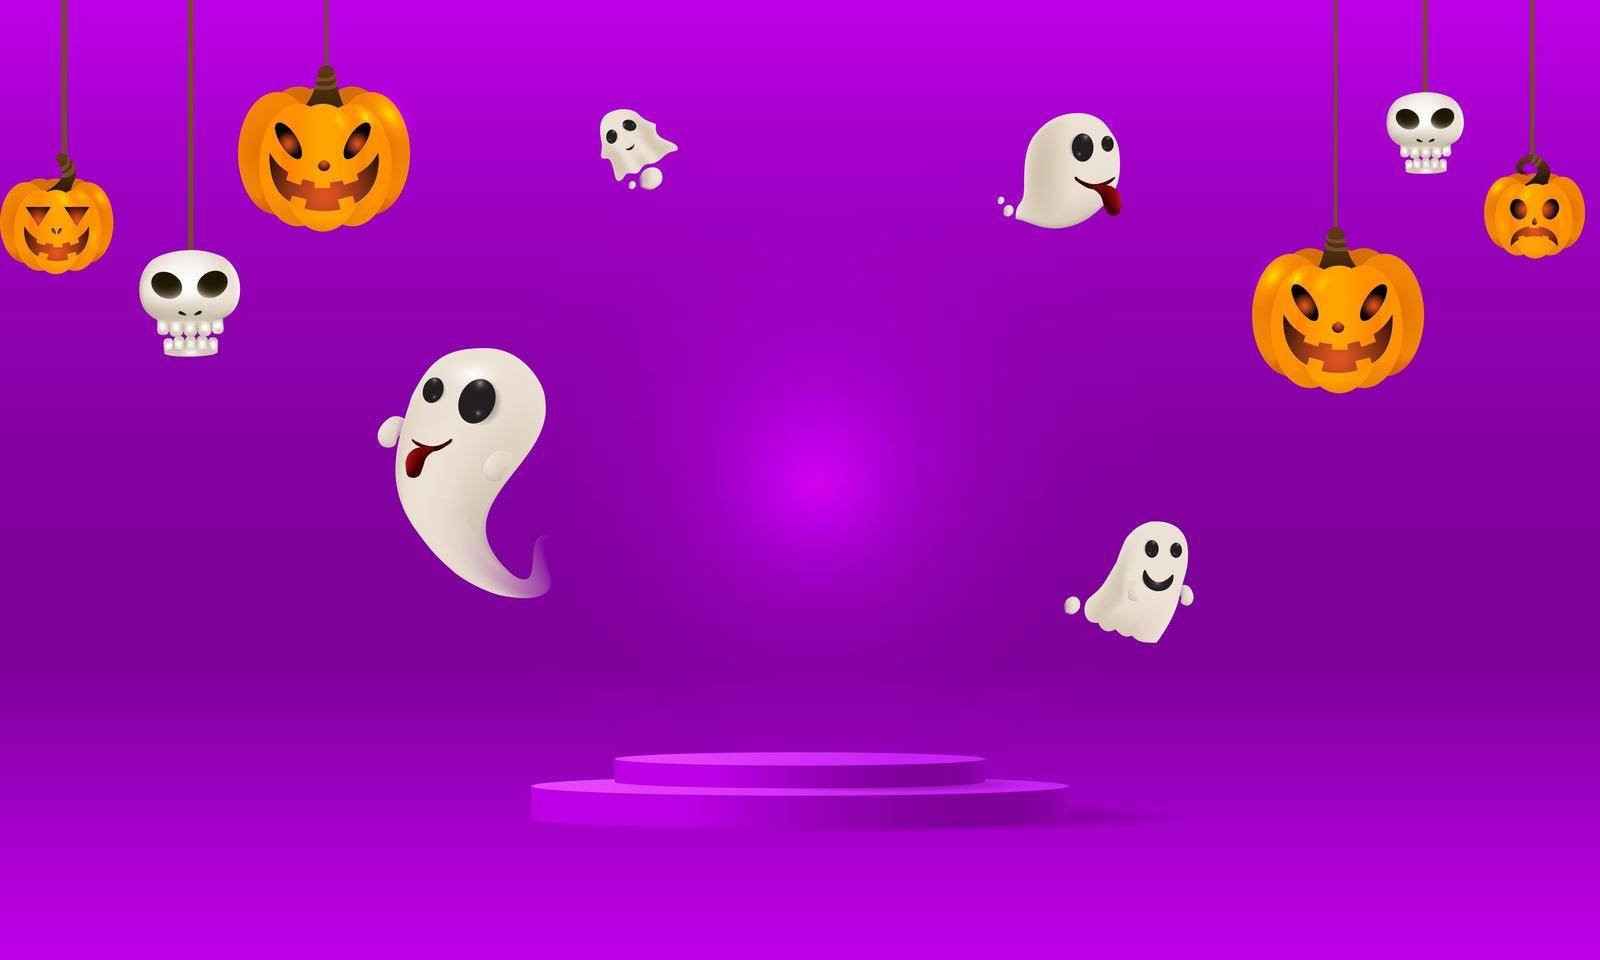 Halloween background For a party and sale on Halloween night.Happy Halloween banner